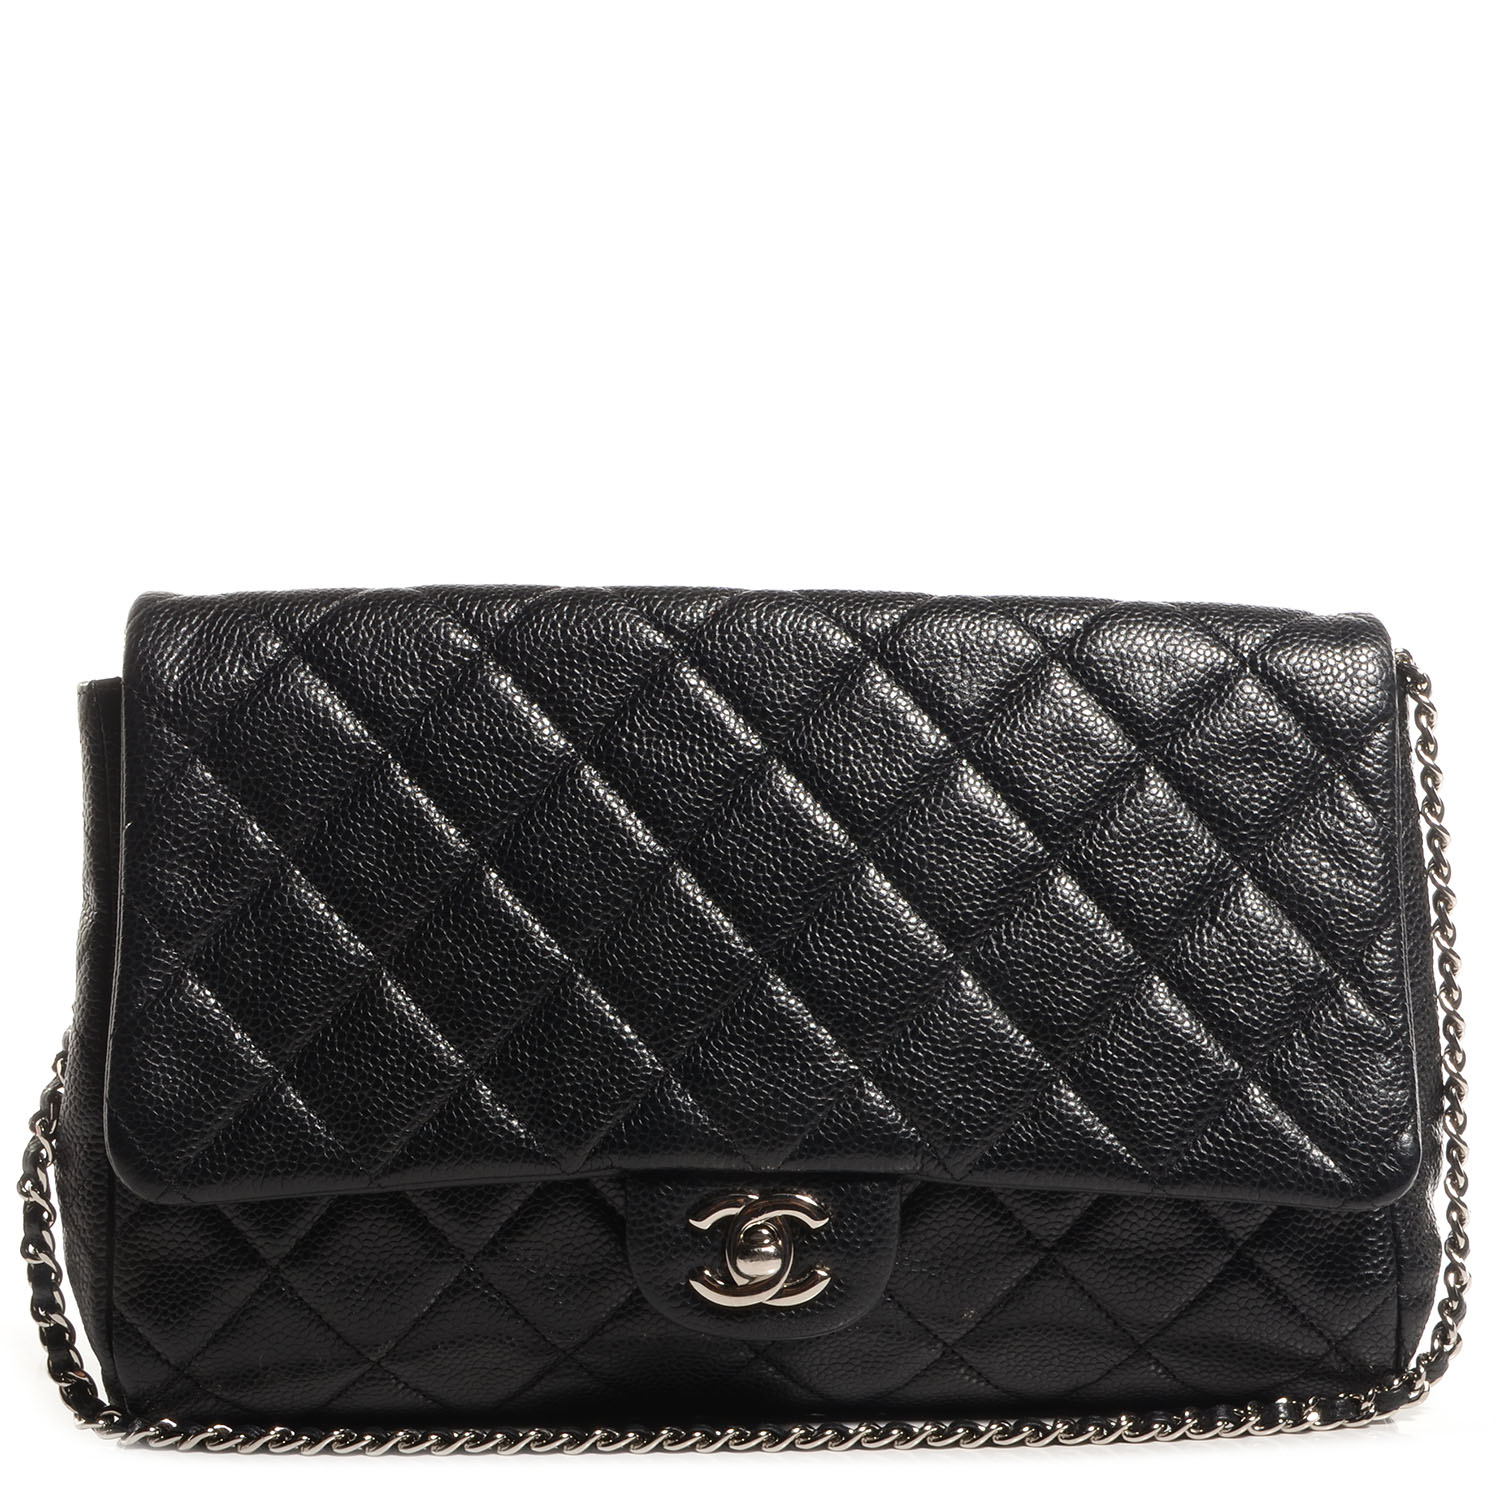 CHANEL Caviar Quilted Clutch With Chain Flap Black 73195